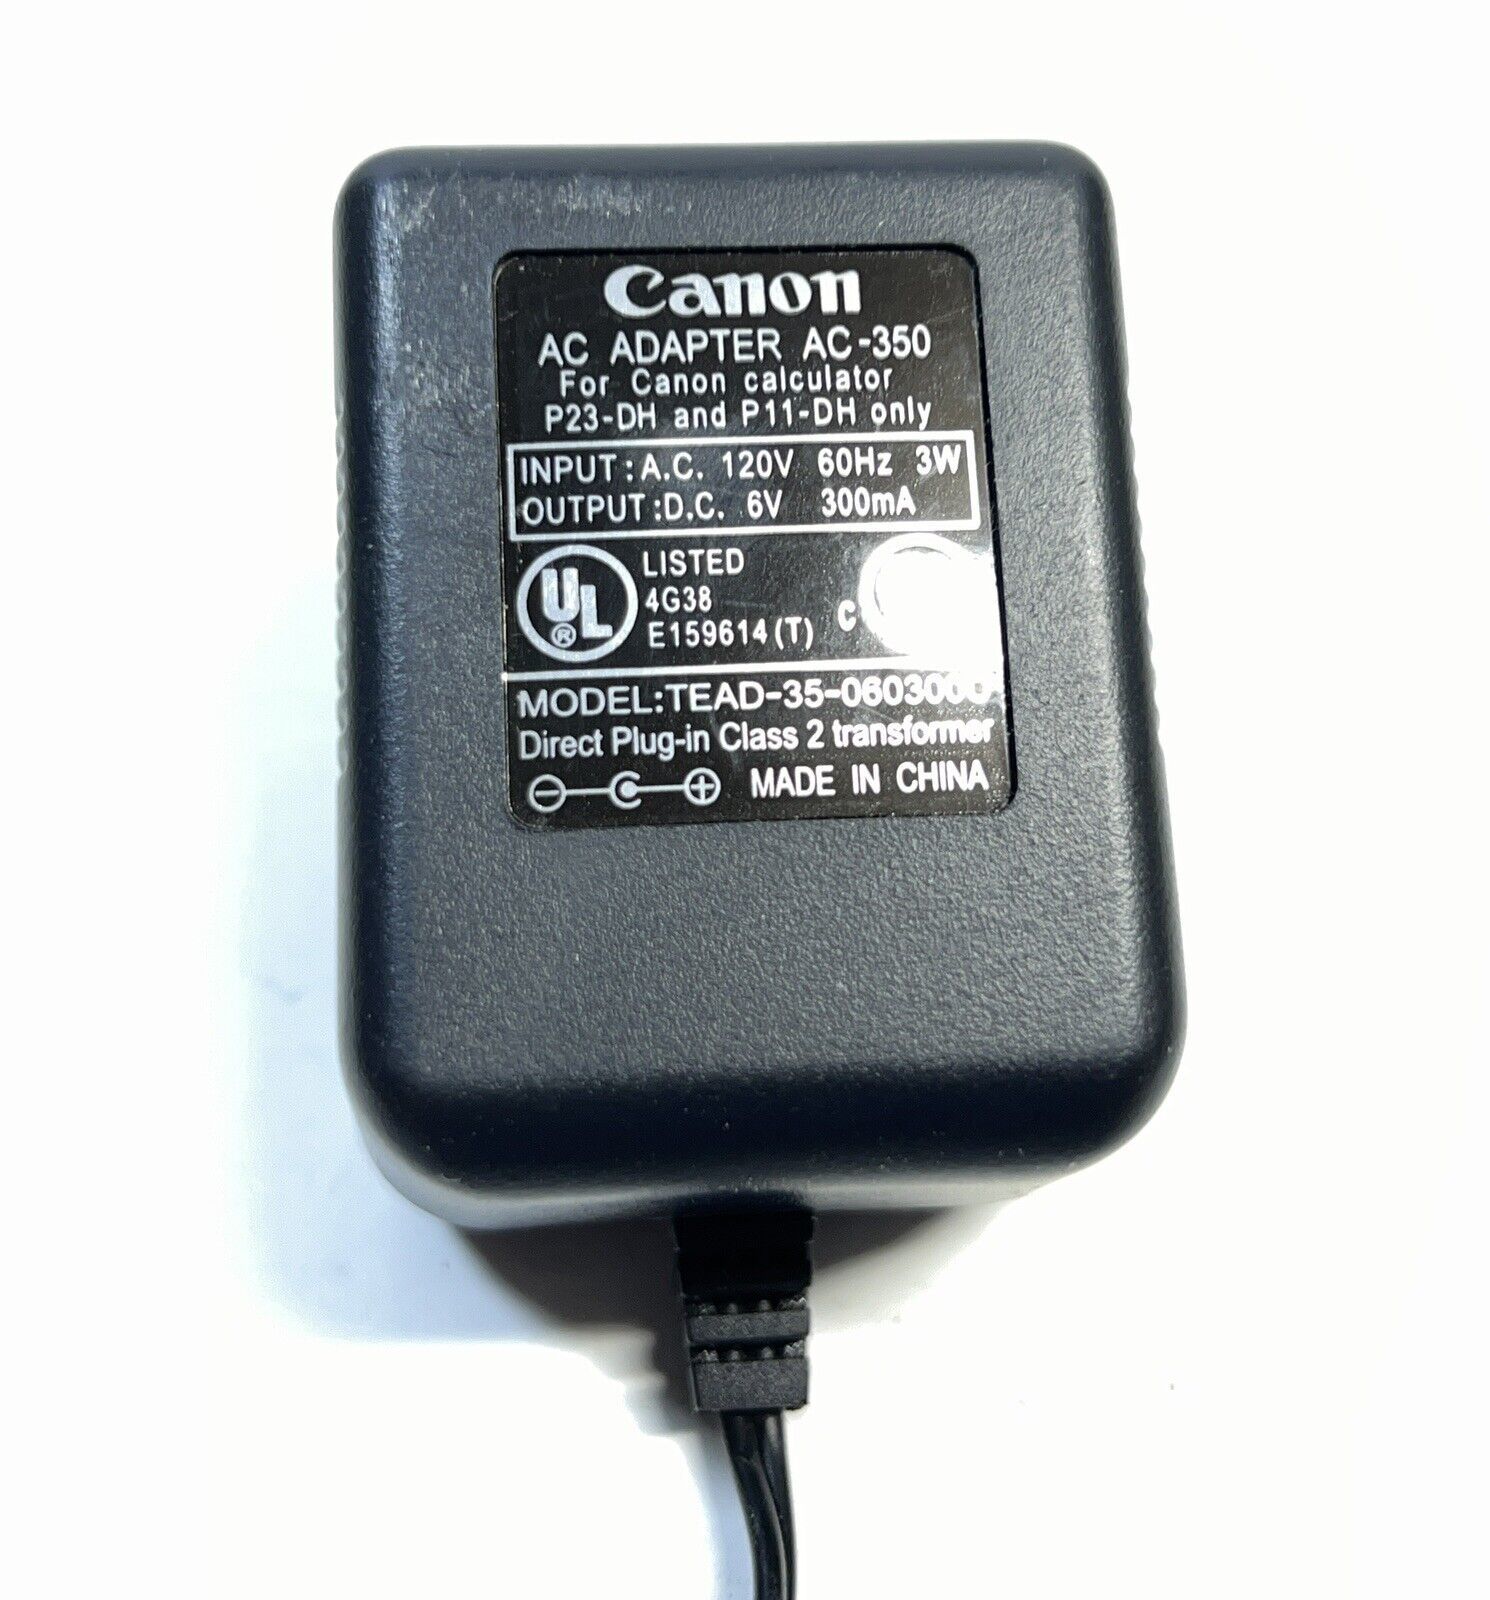 CANON AC-350 Power Adapter/SUPPLY TEAD-35-060300U for P23-DH & P11-DH Calculator - $7.91